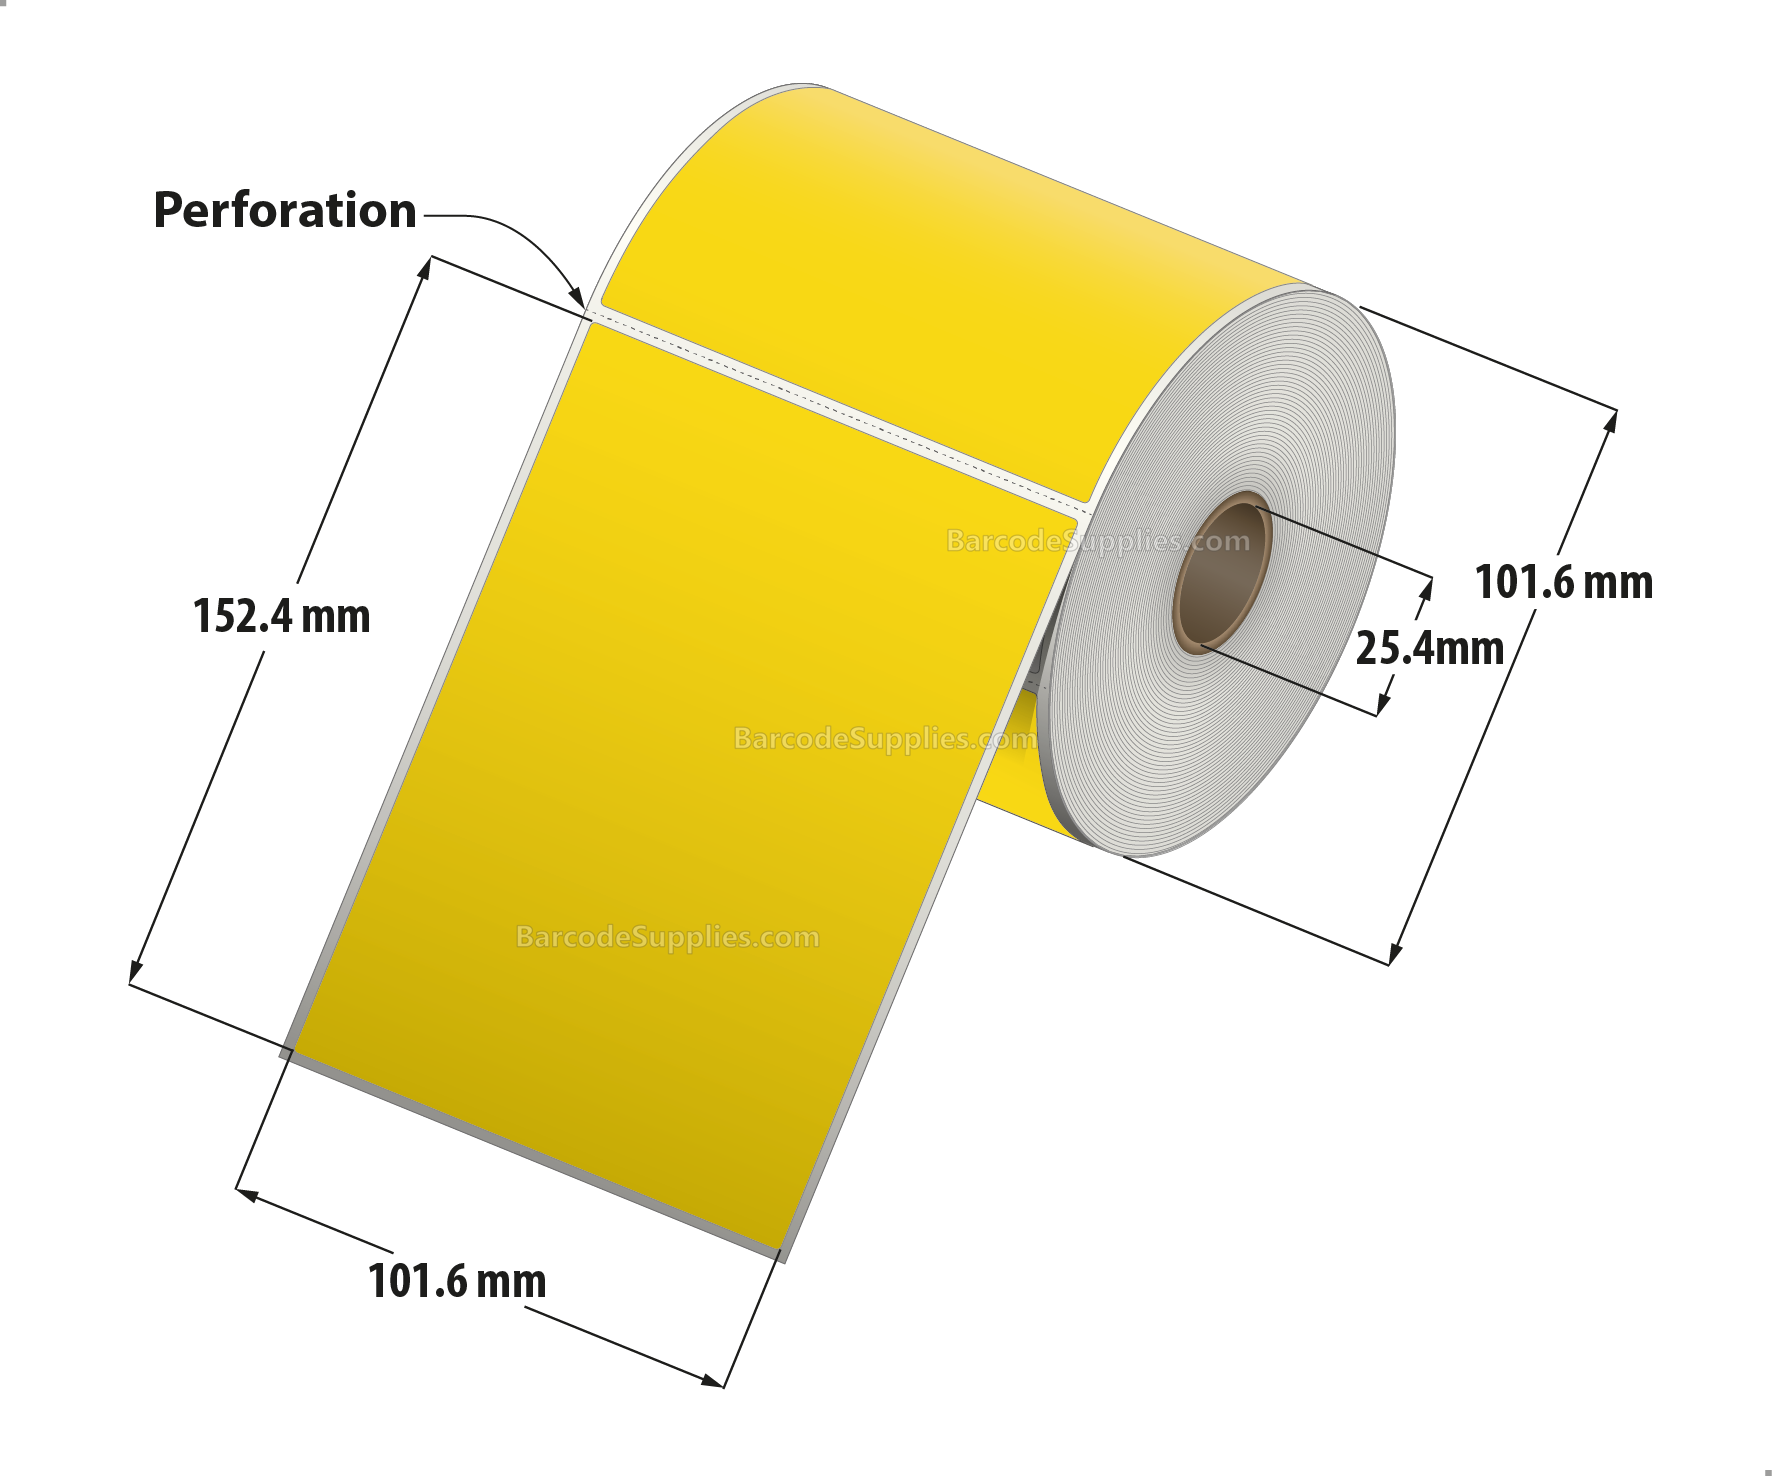 4 x 6 Direct Thermal Yellow Labels With Acrylic Adhesive - Perforated - 250 Labels Per Roll - Carton Of 12 Rolls - 3000 Labels Total - MPN: RD-4-6-250-YL